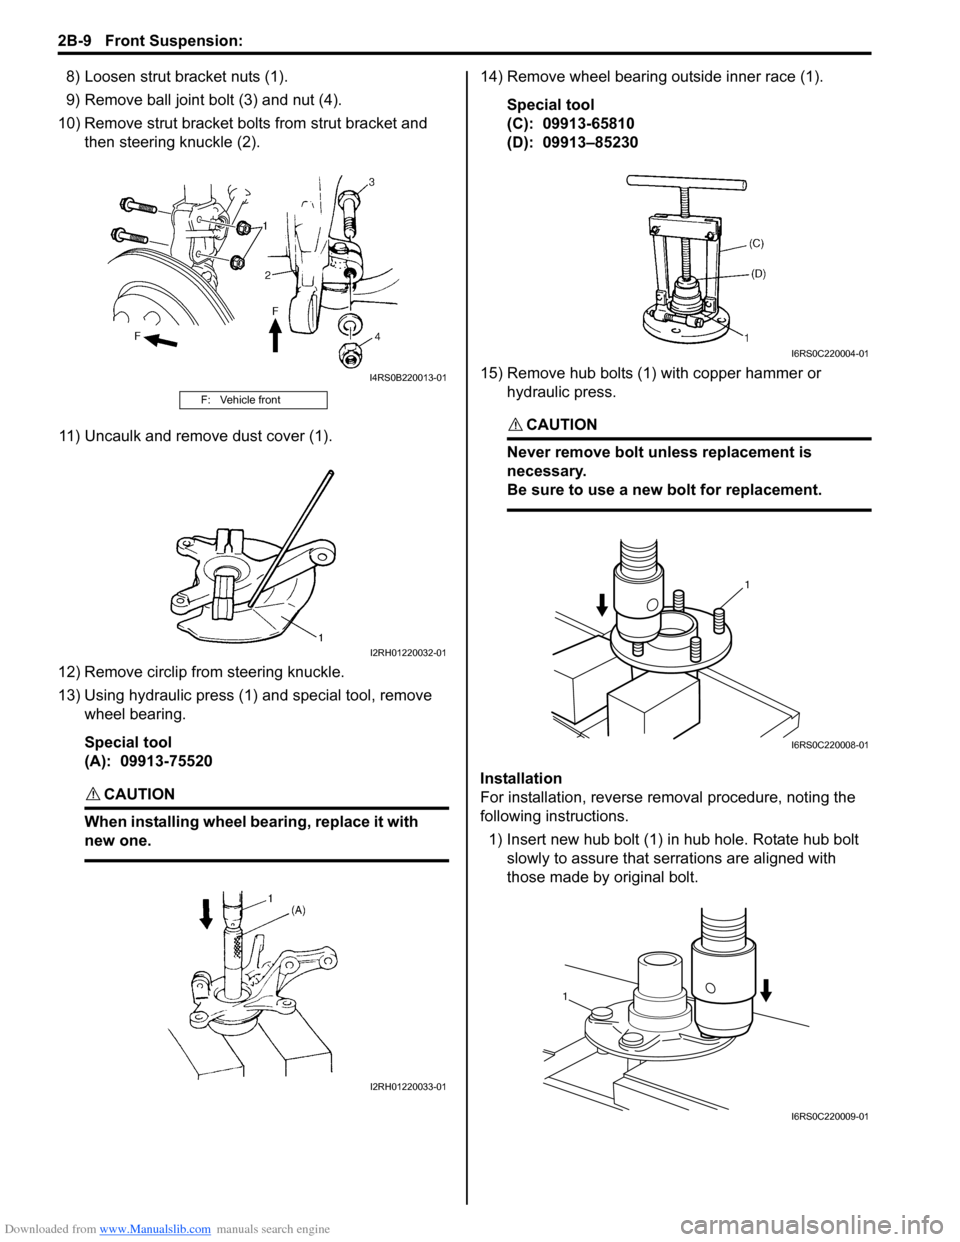 SUZUKI SWIFT 2005 2.G Service Workshop Manual Downloaded from www.Manualslib.com manuals search engine 2B-9 Front Suspension: 
8) Loosen strut bracket nuts (1).
9) Remove ball joint bolt (3) and nut (4).
10) Remove strut bracket bolt s from strut